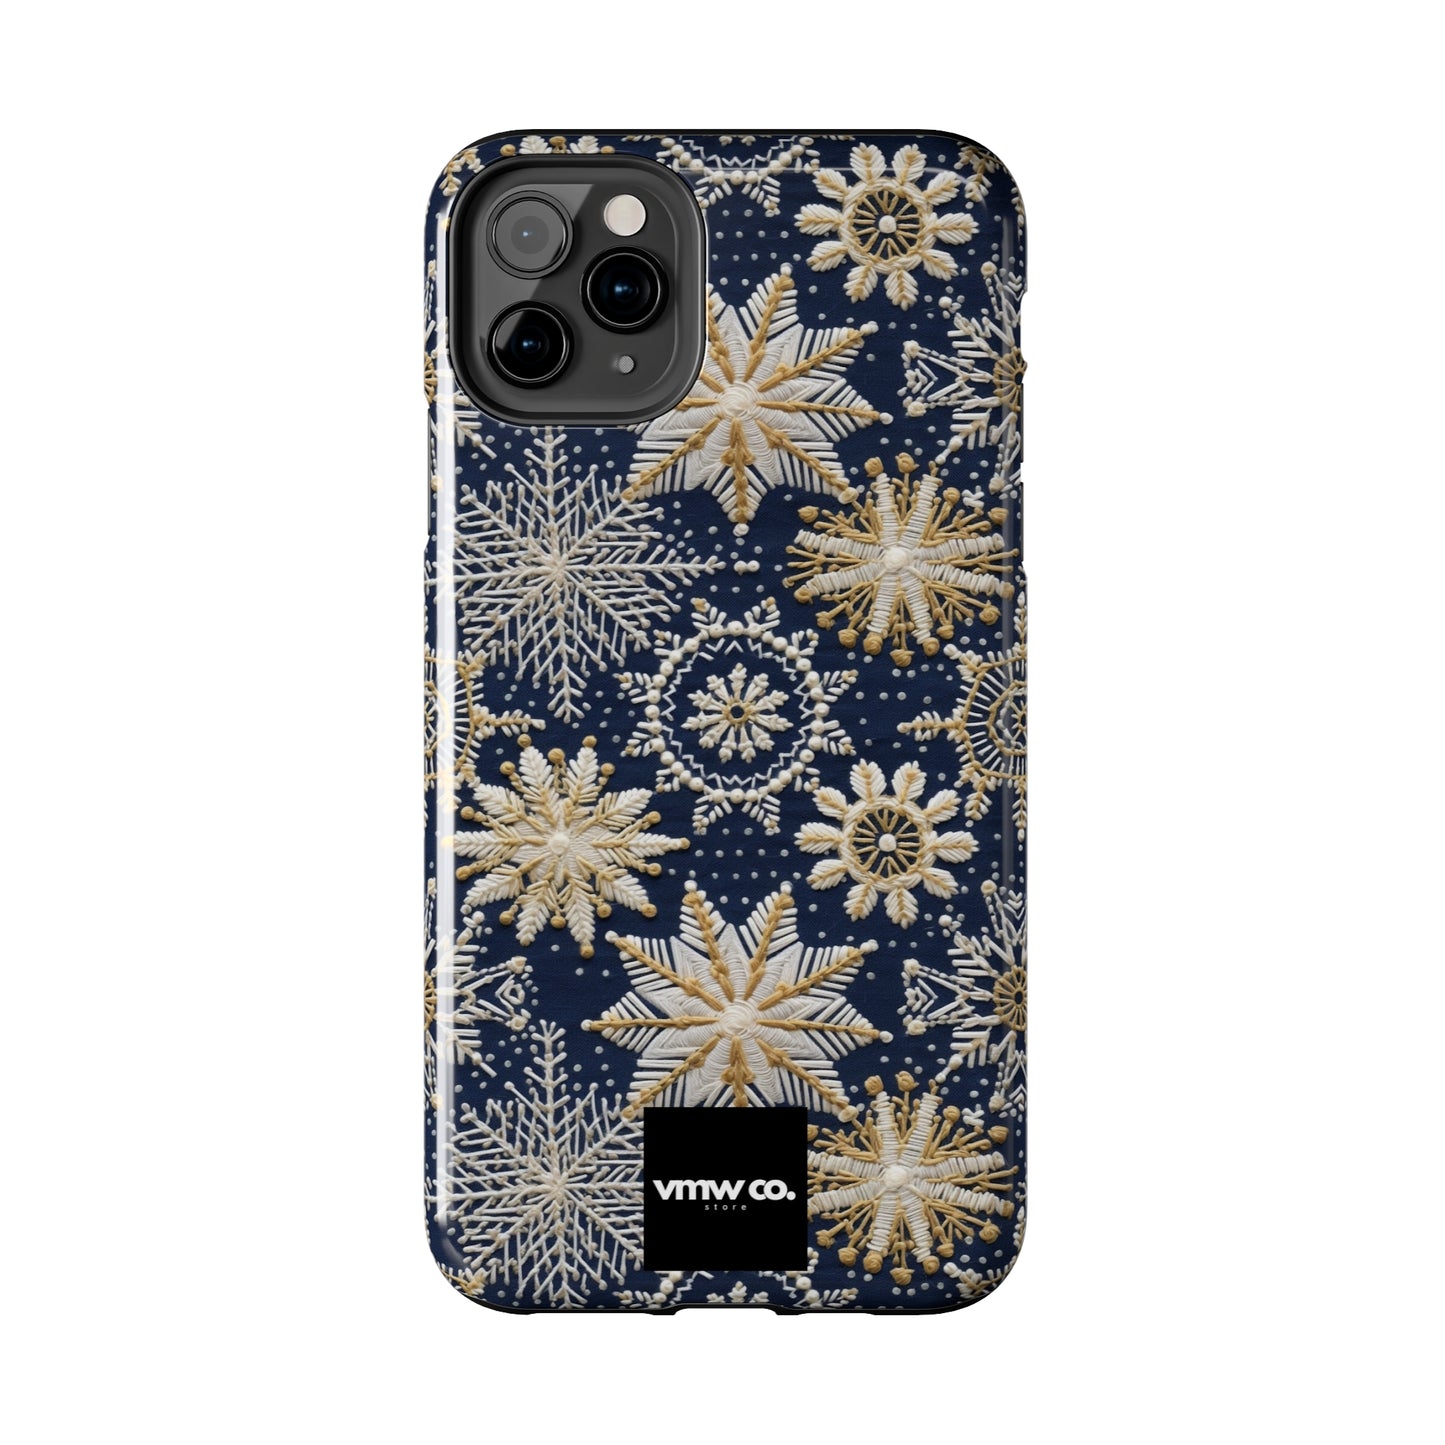 Midnight Snowflake iPhone Tough Phone Cases